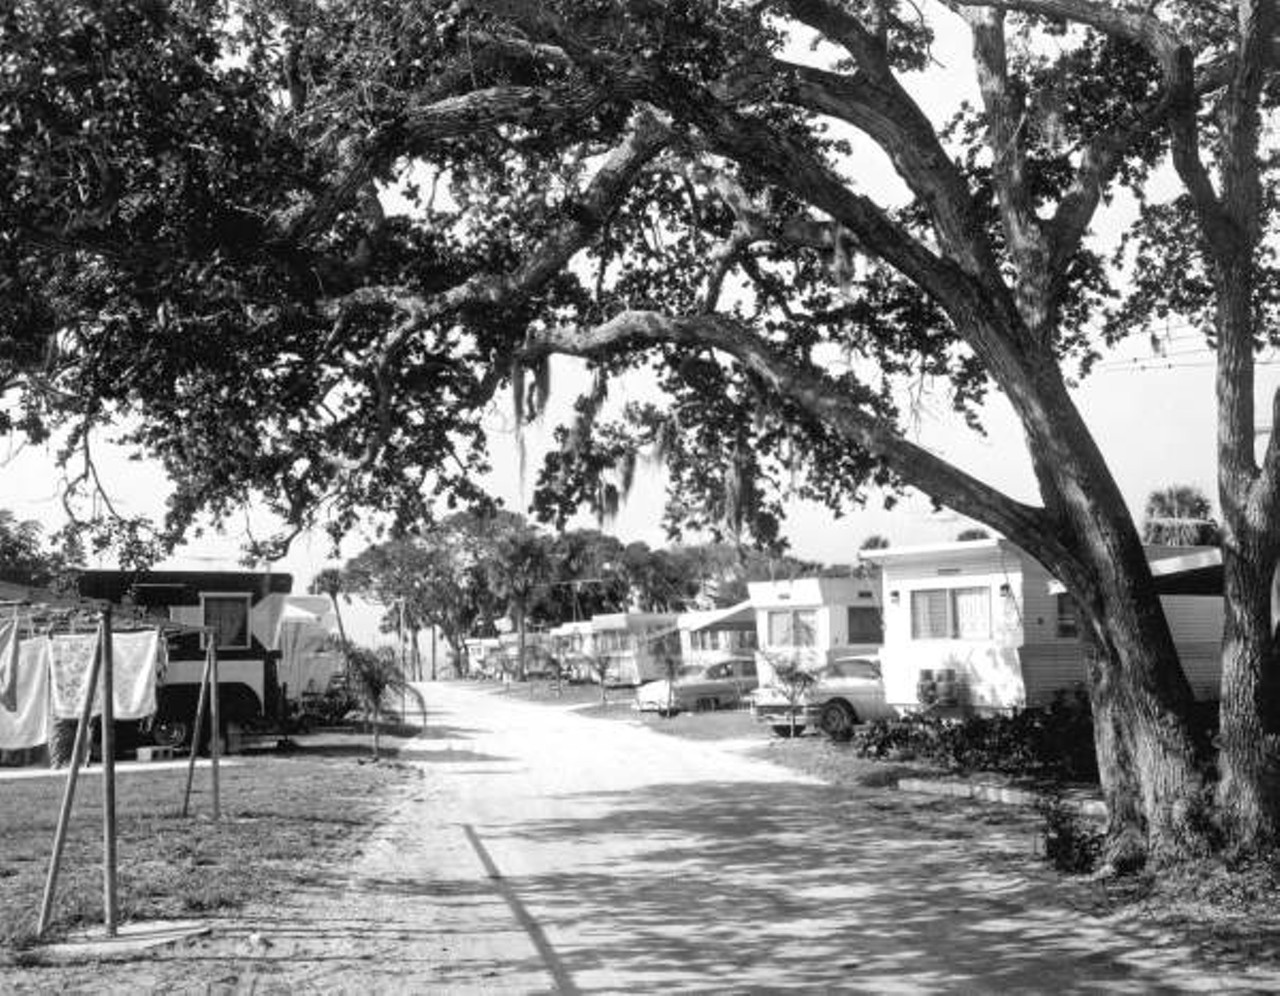 Trailer park in Cape Canaveral, 1958